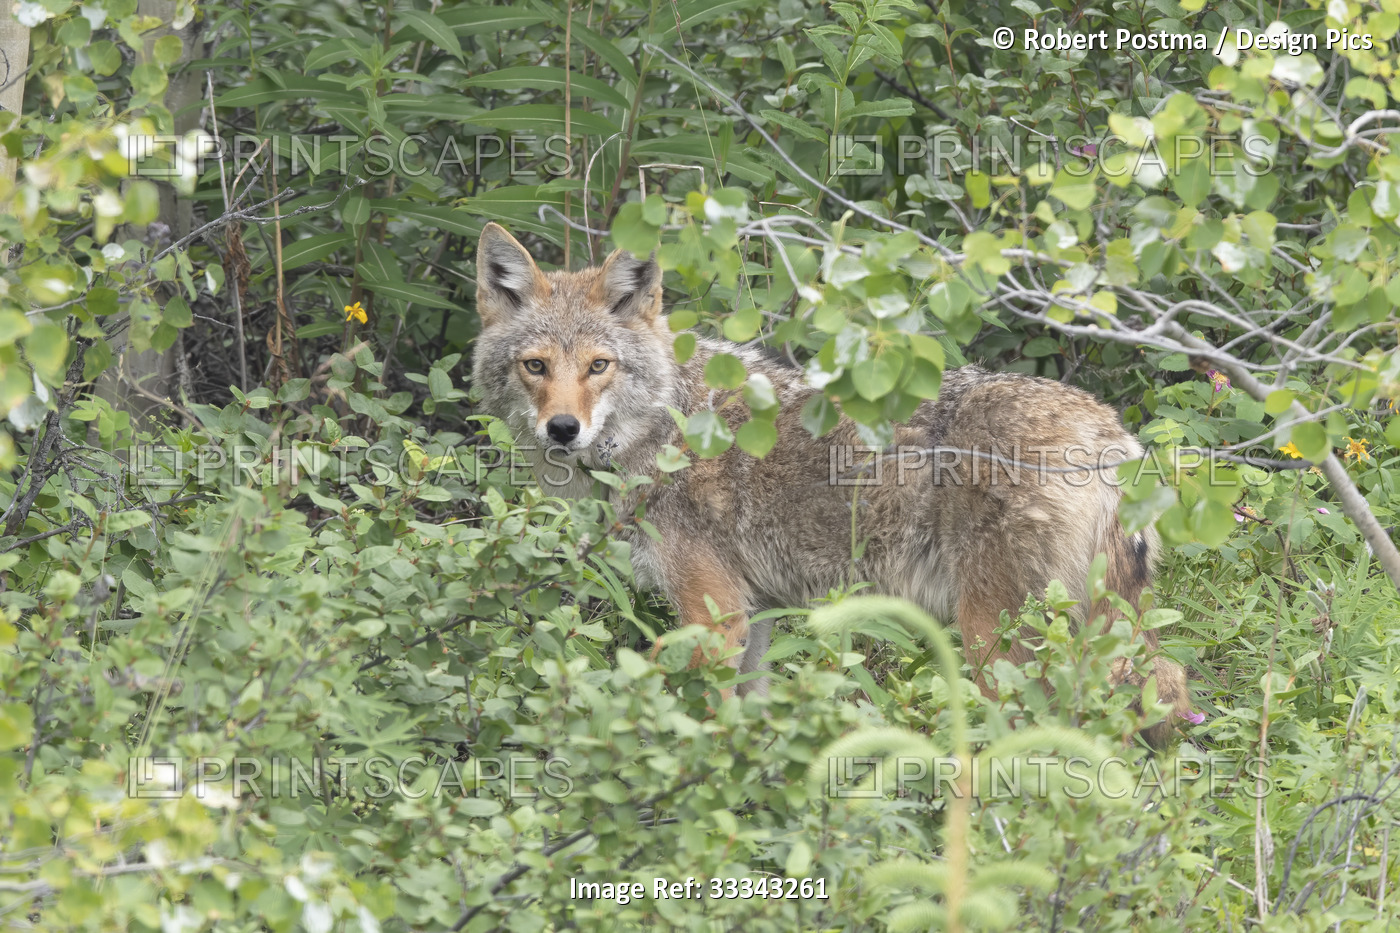 Coyote (Canis latrans) standing in forest foliage looking towards the camera; ...